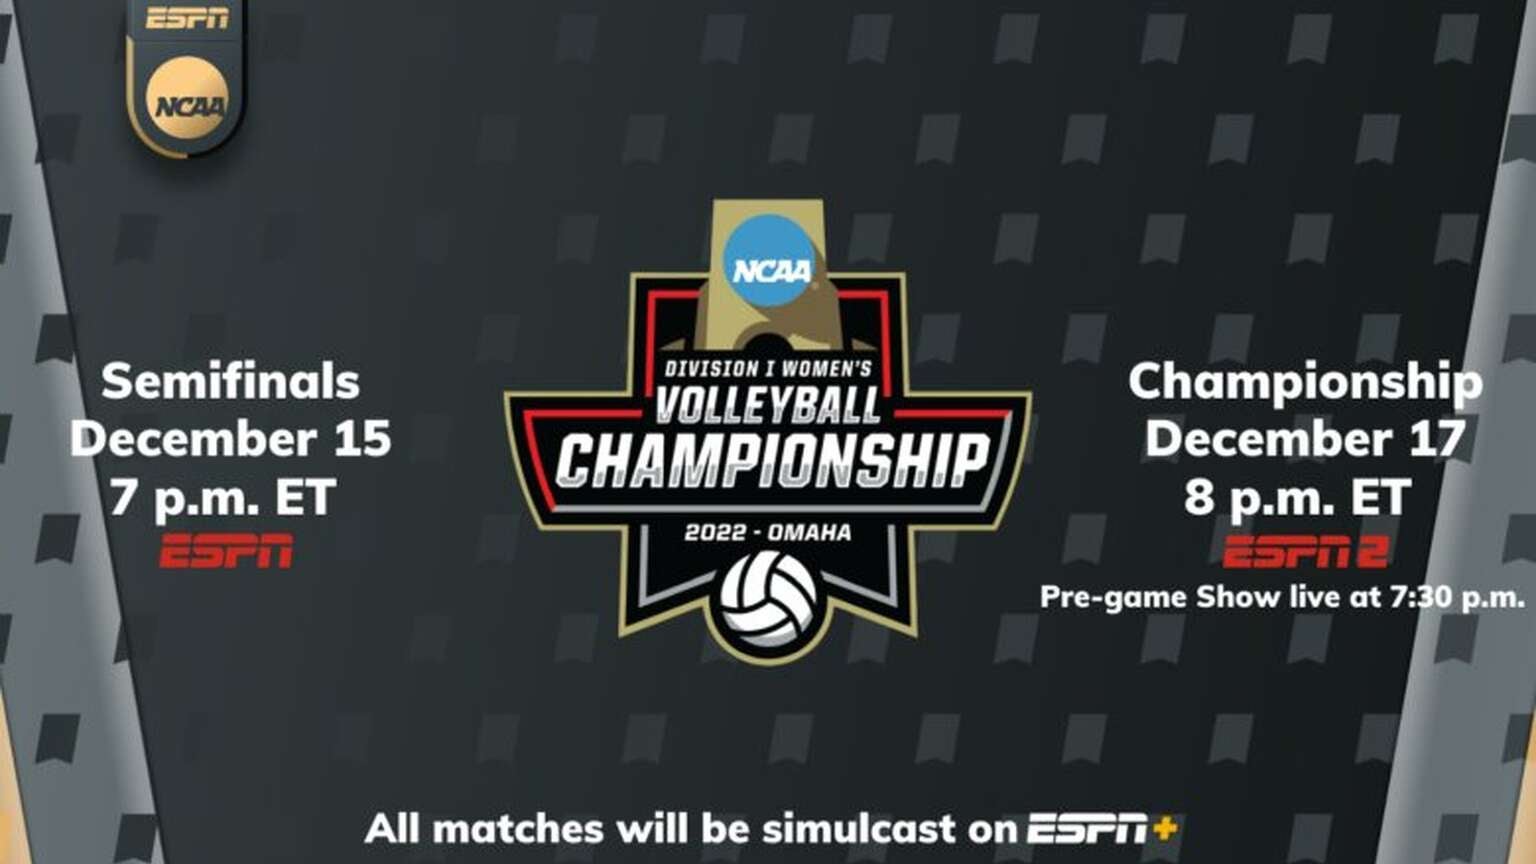 How to Watch the 2022 NCAA Division I Women’s Volleyball Semifinals